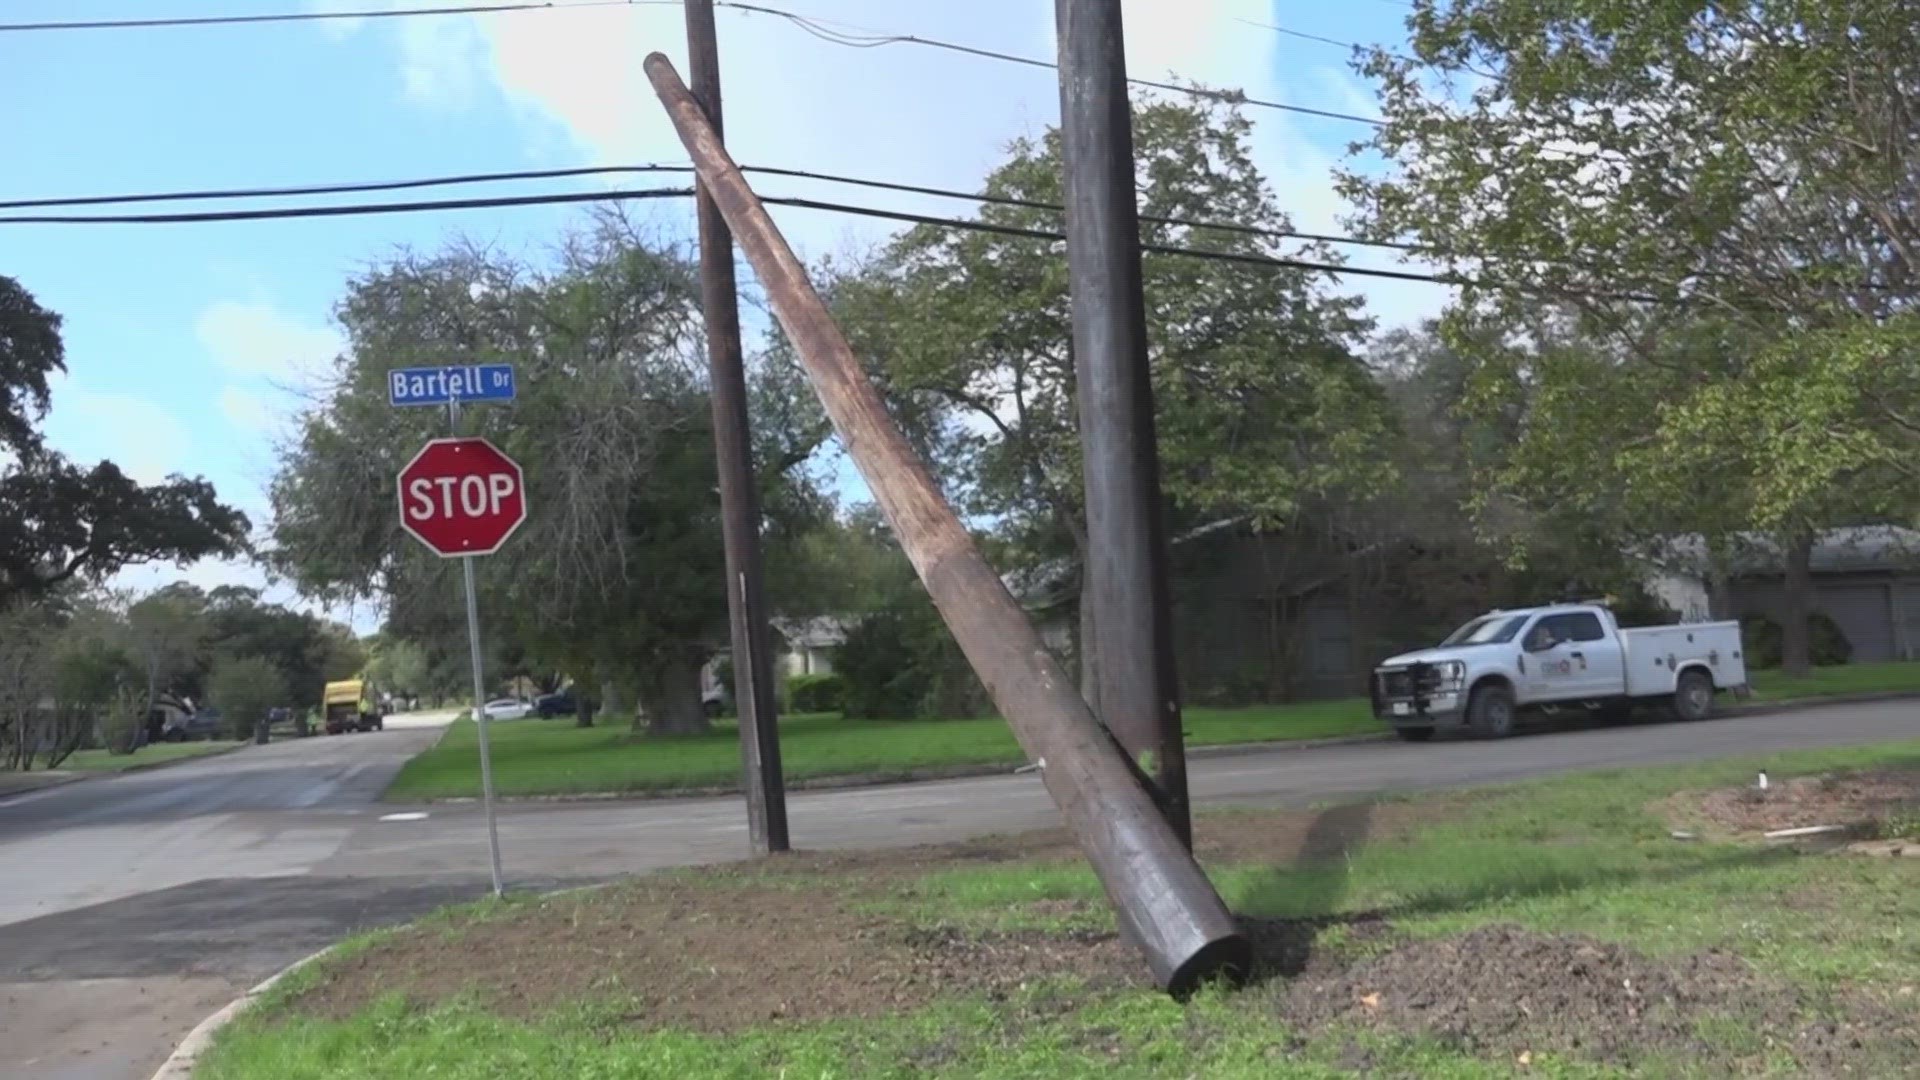 Kathie Love reached out to KENS 5 when she felt her concerns weren't addressed to satisfaction regarding liability, repairs and when the pole would be removed.